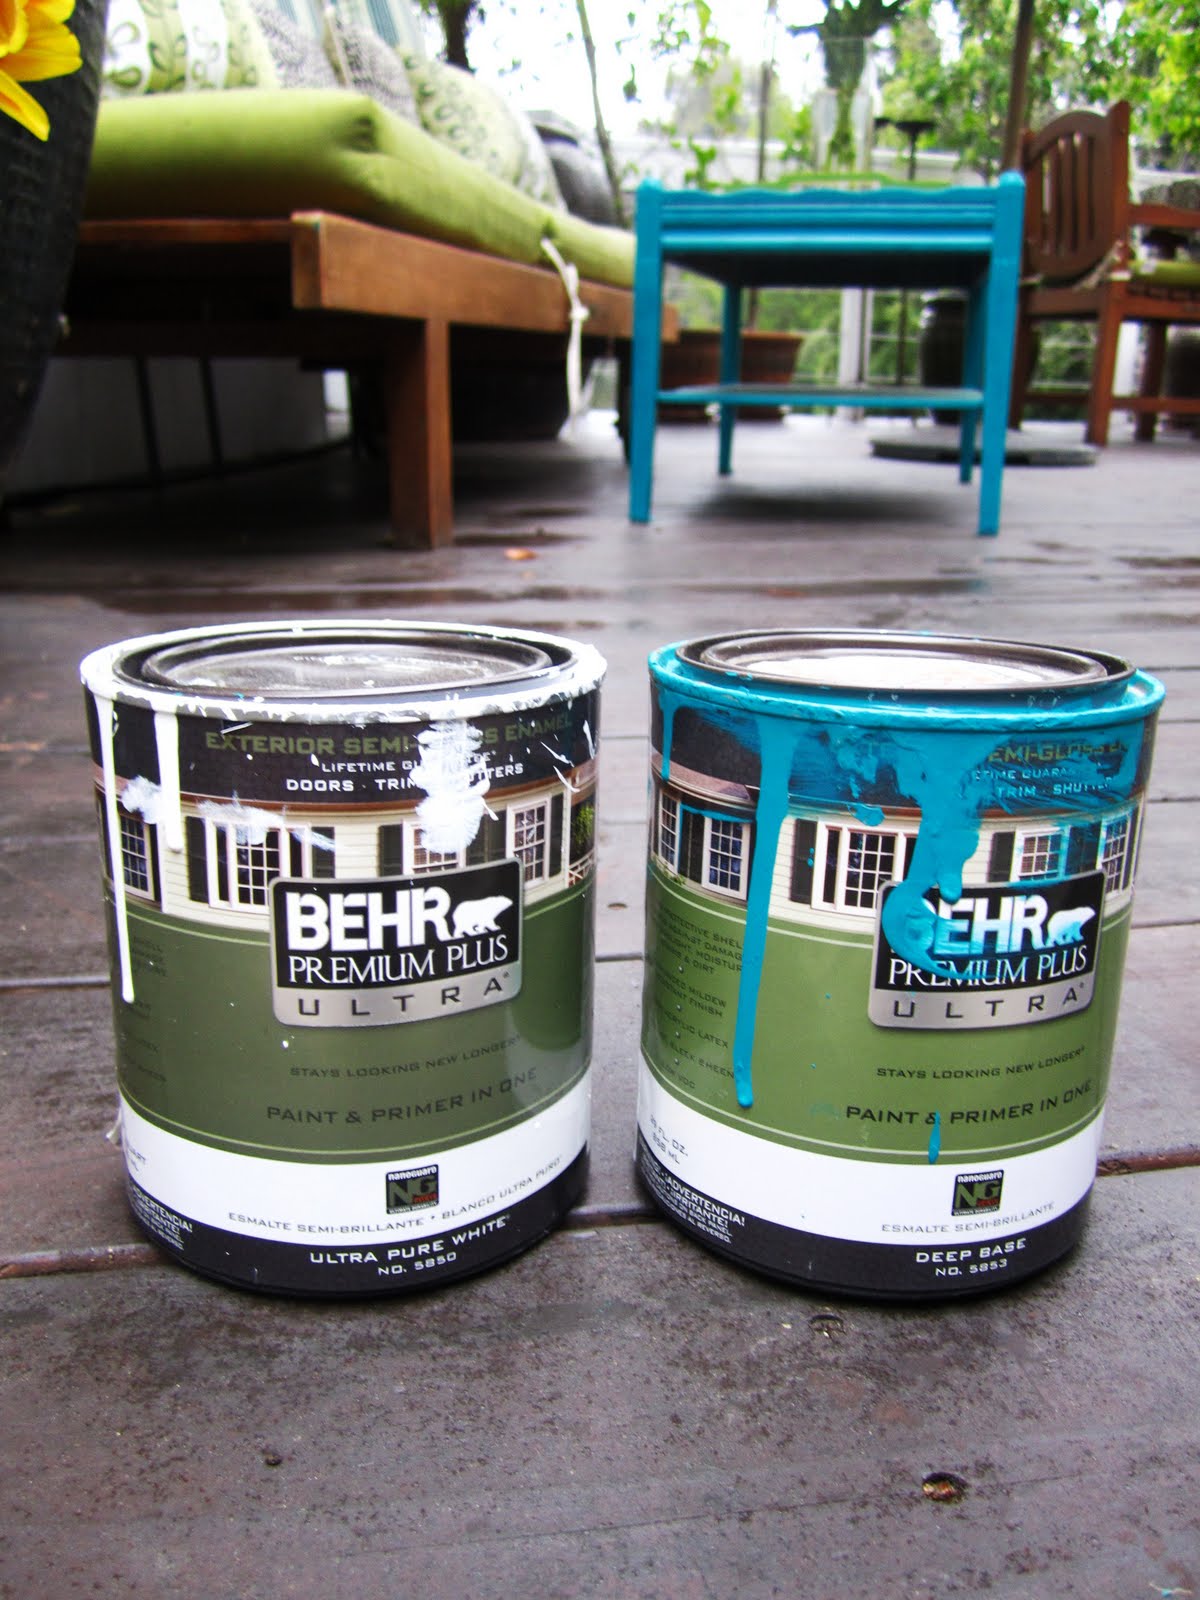  Home Depot  Behr Paint  Tropical Waters blue high gloss and White